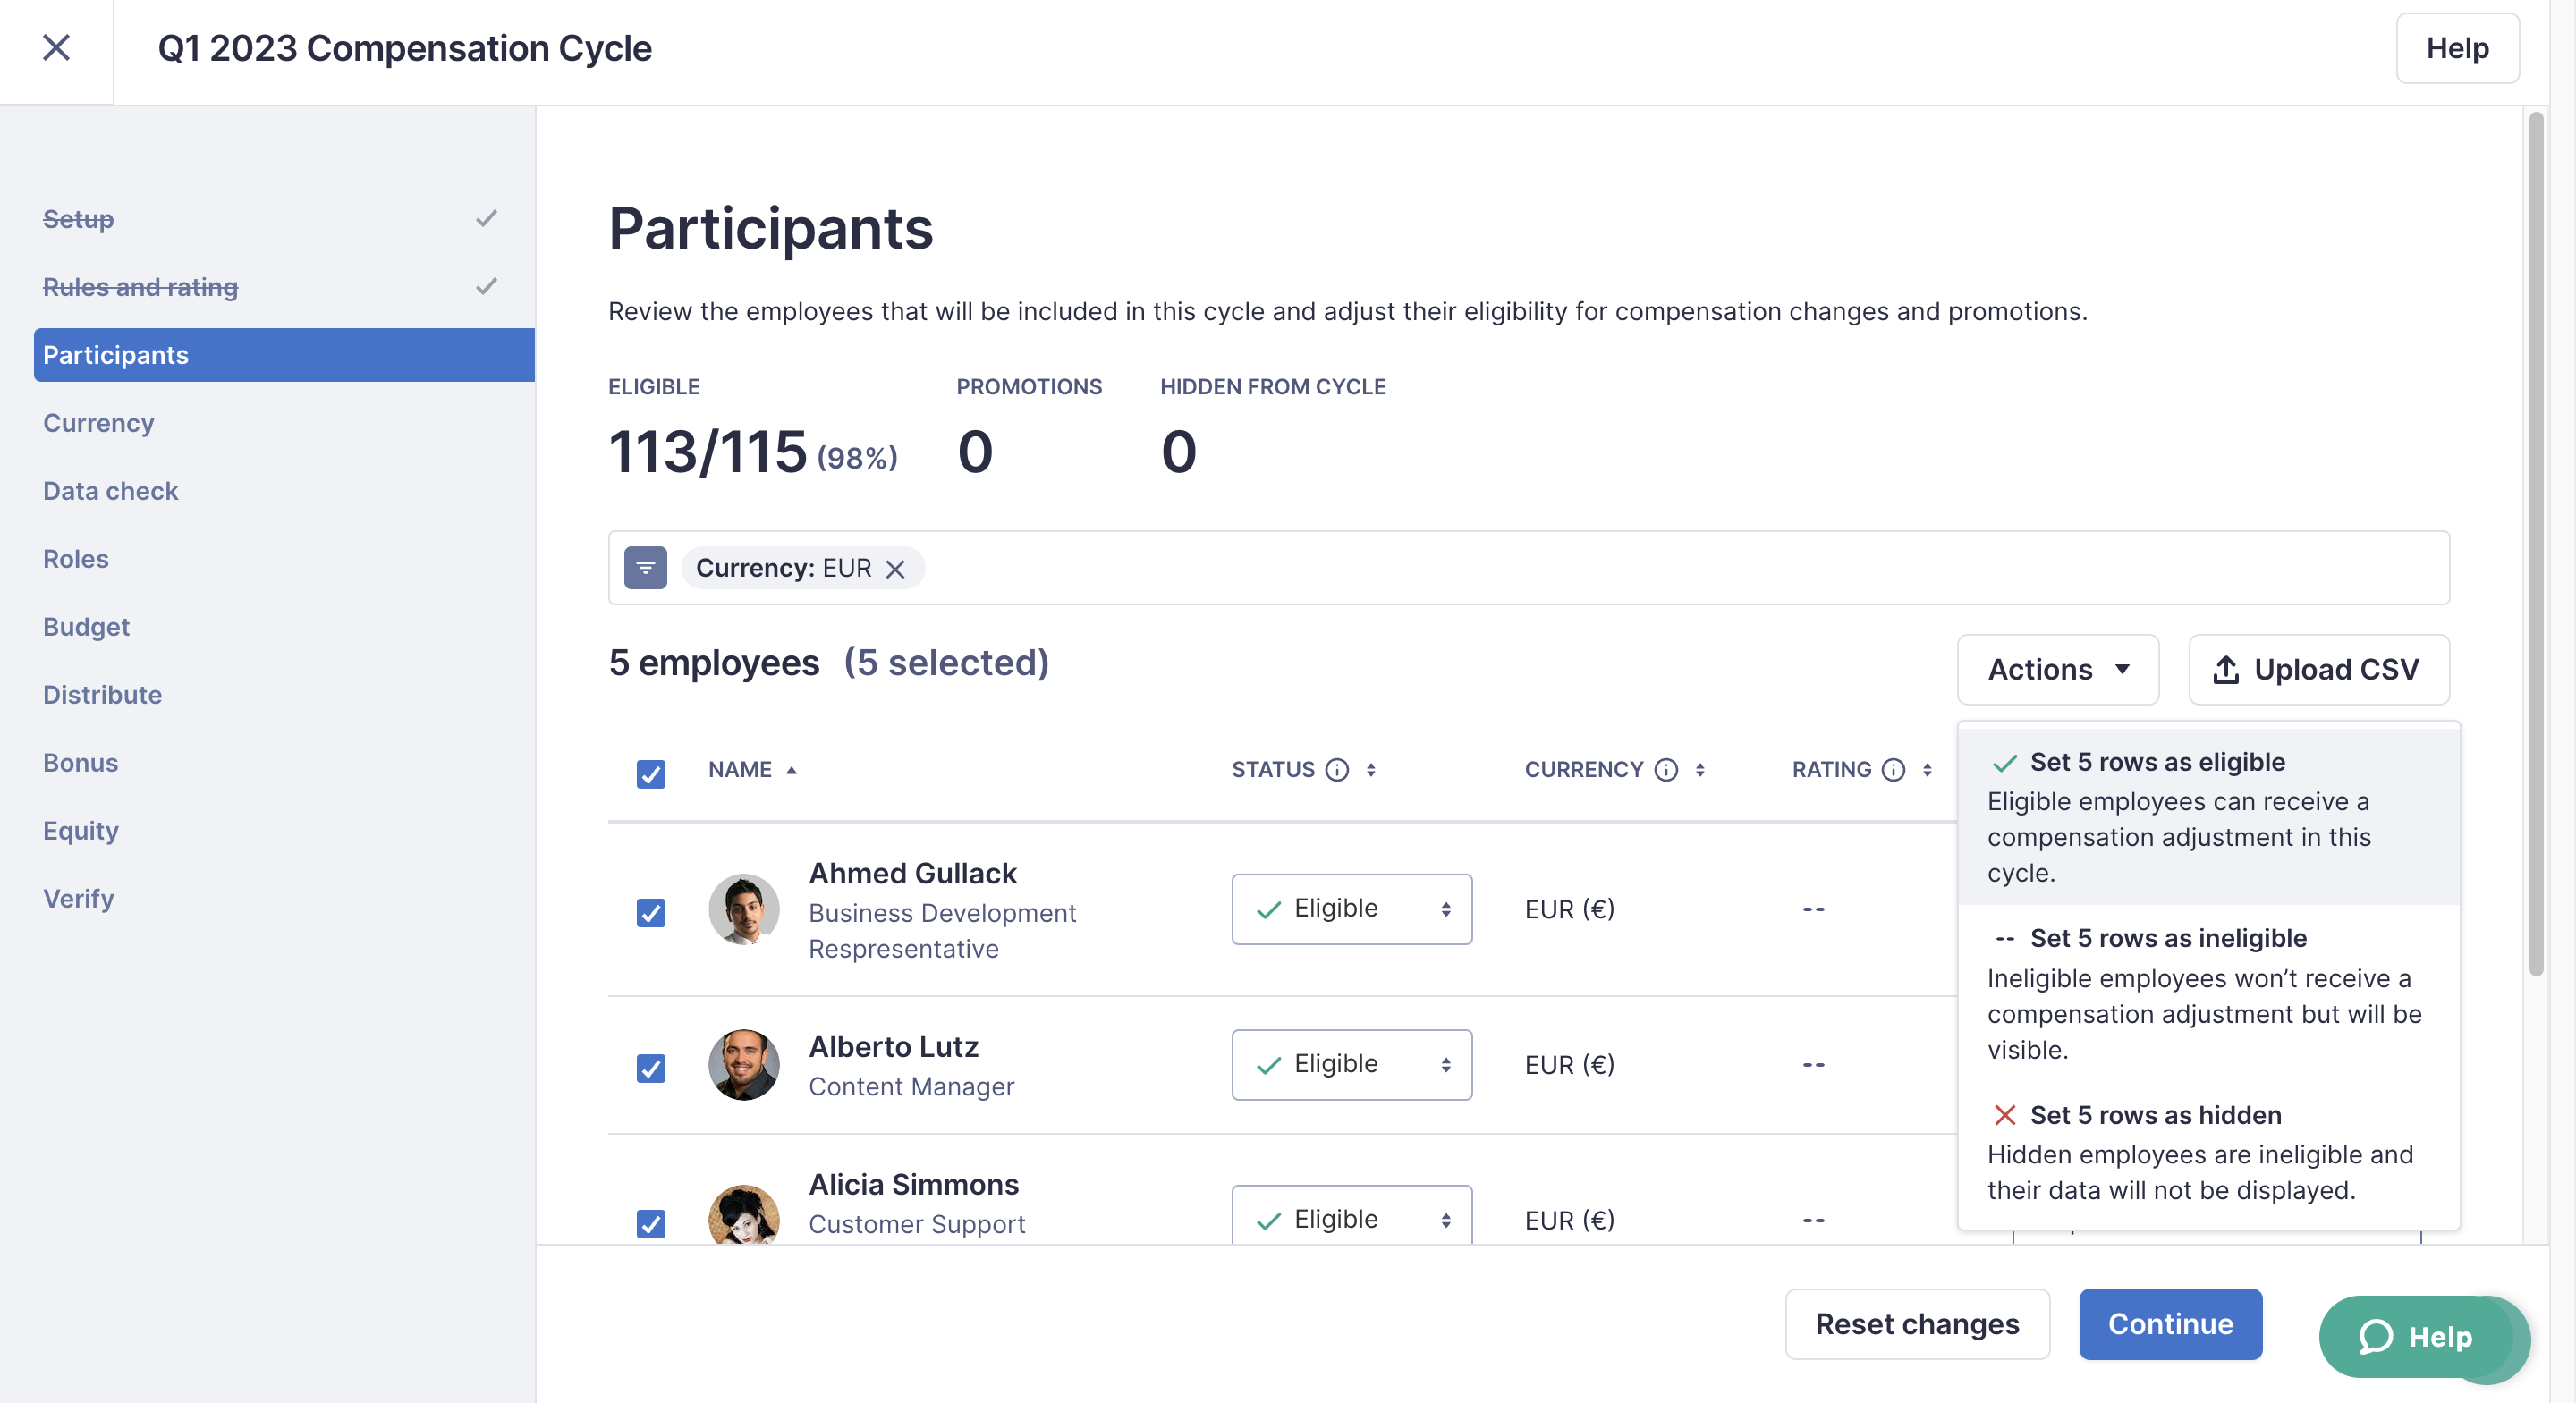 Compensation cycle setup open to the Participants page, showing the Actions dropdown menu